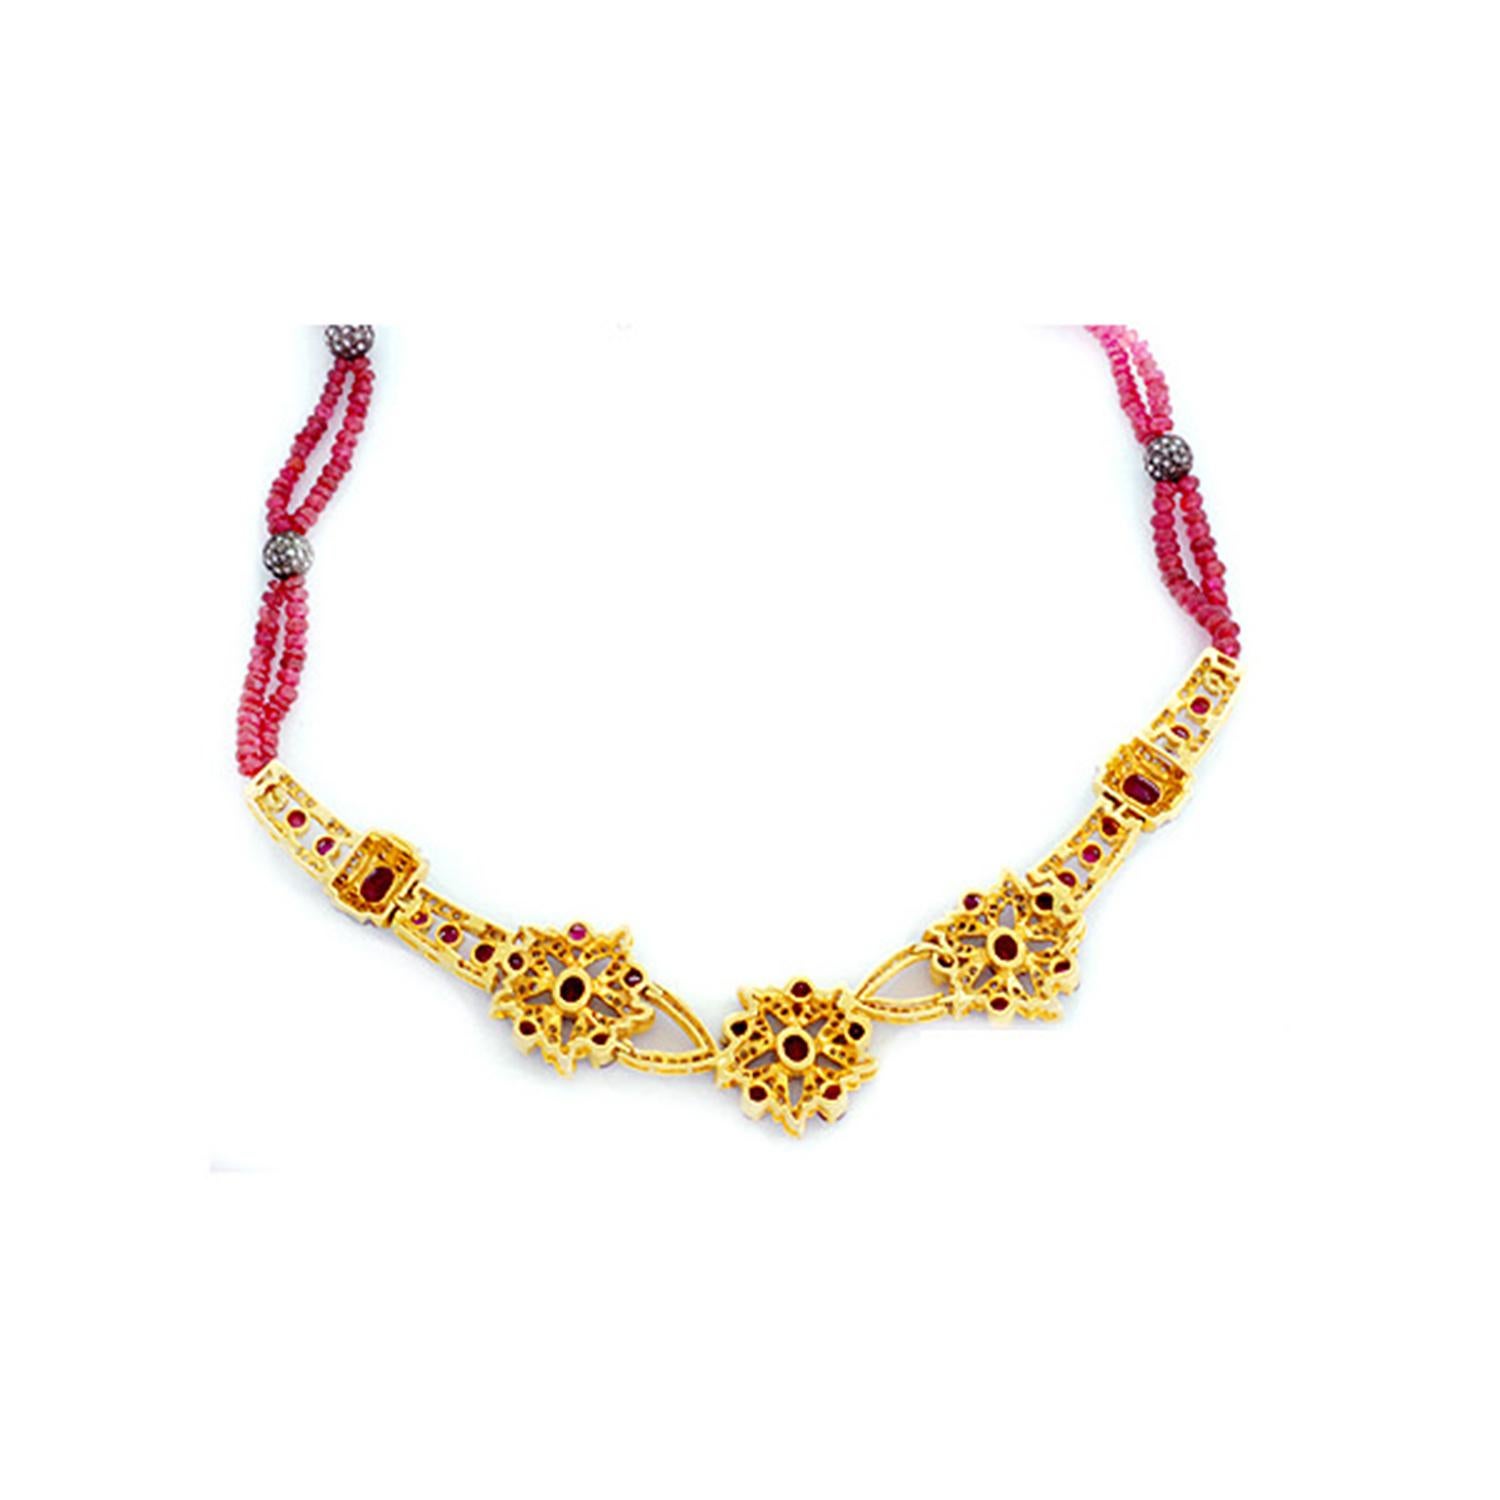 Art Deco Ethnic Looking Ruby Beaded Necklace With Diamonds Made In 18k Yellow Gold For Sale